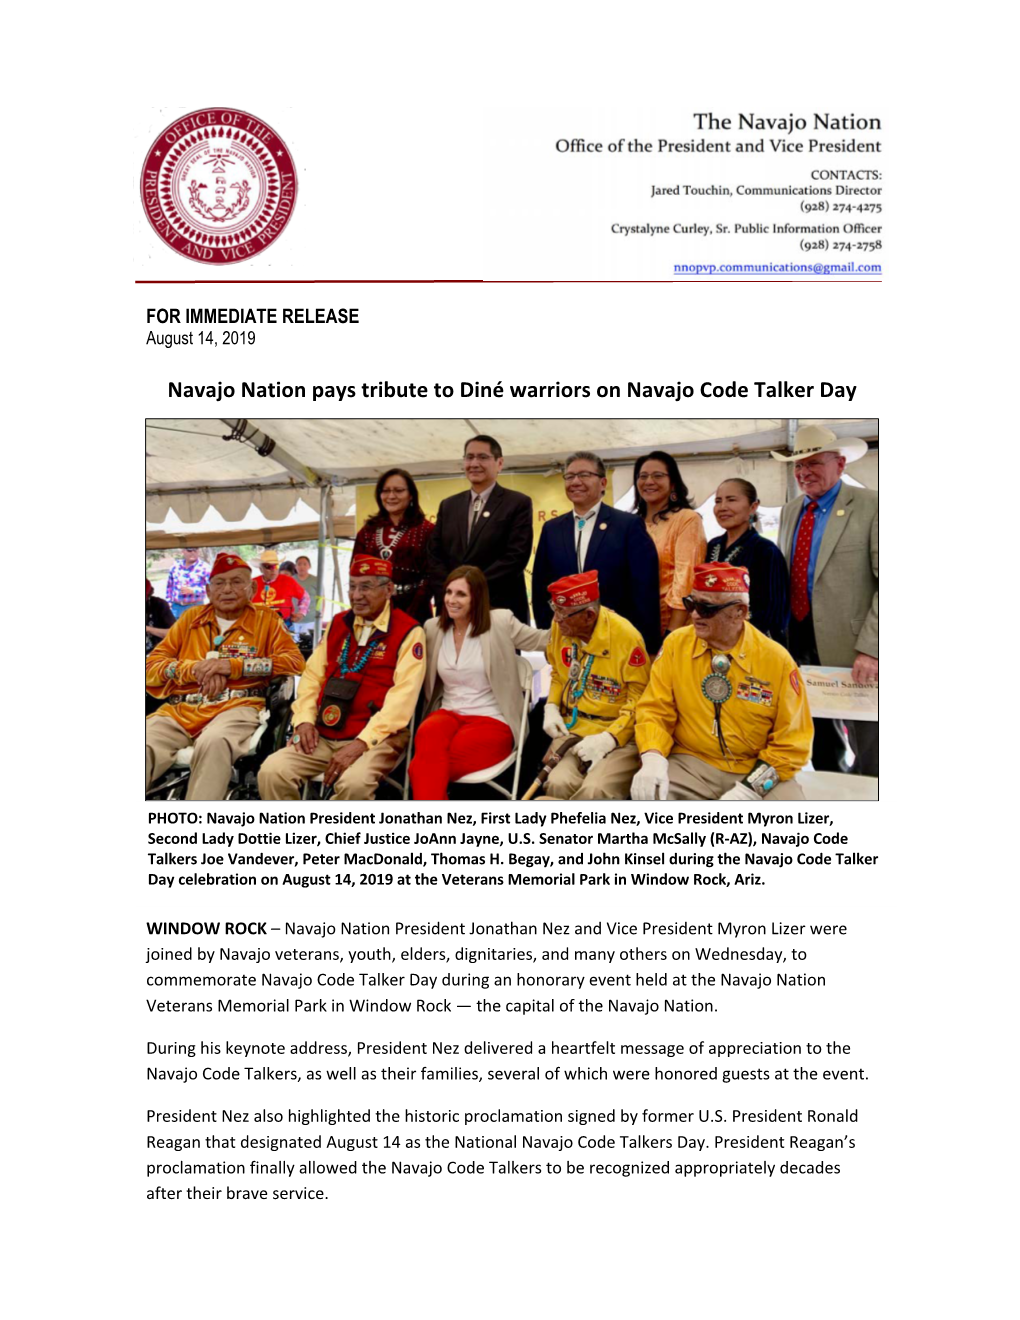 Navajo Nation Pays Tribute to Diné Warriors on Navajo Code Talker Day